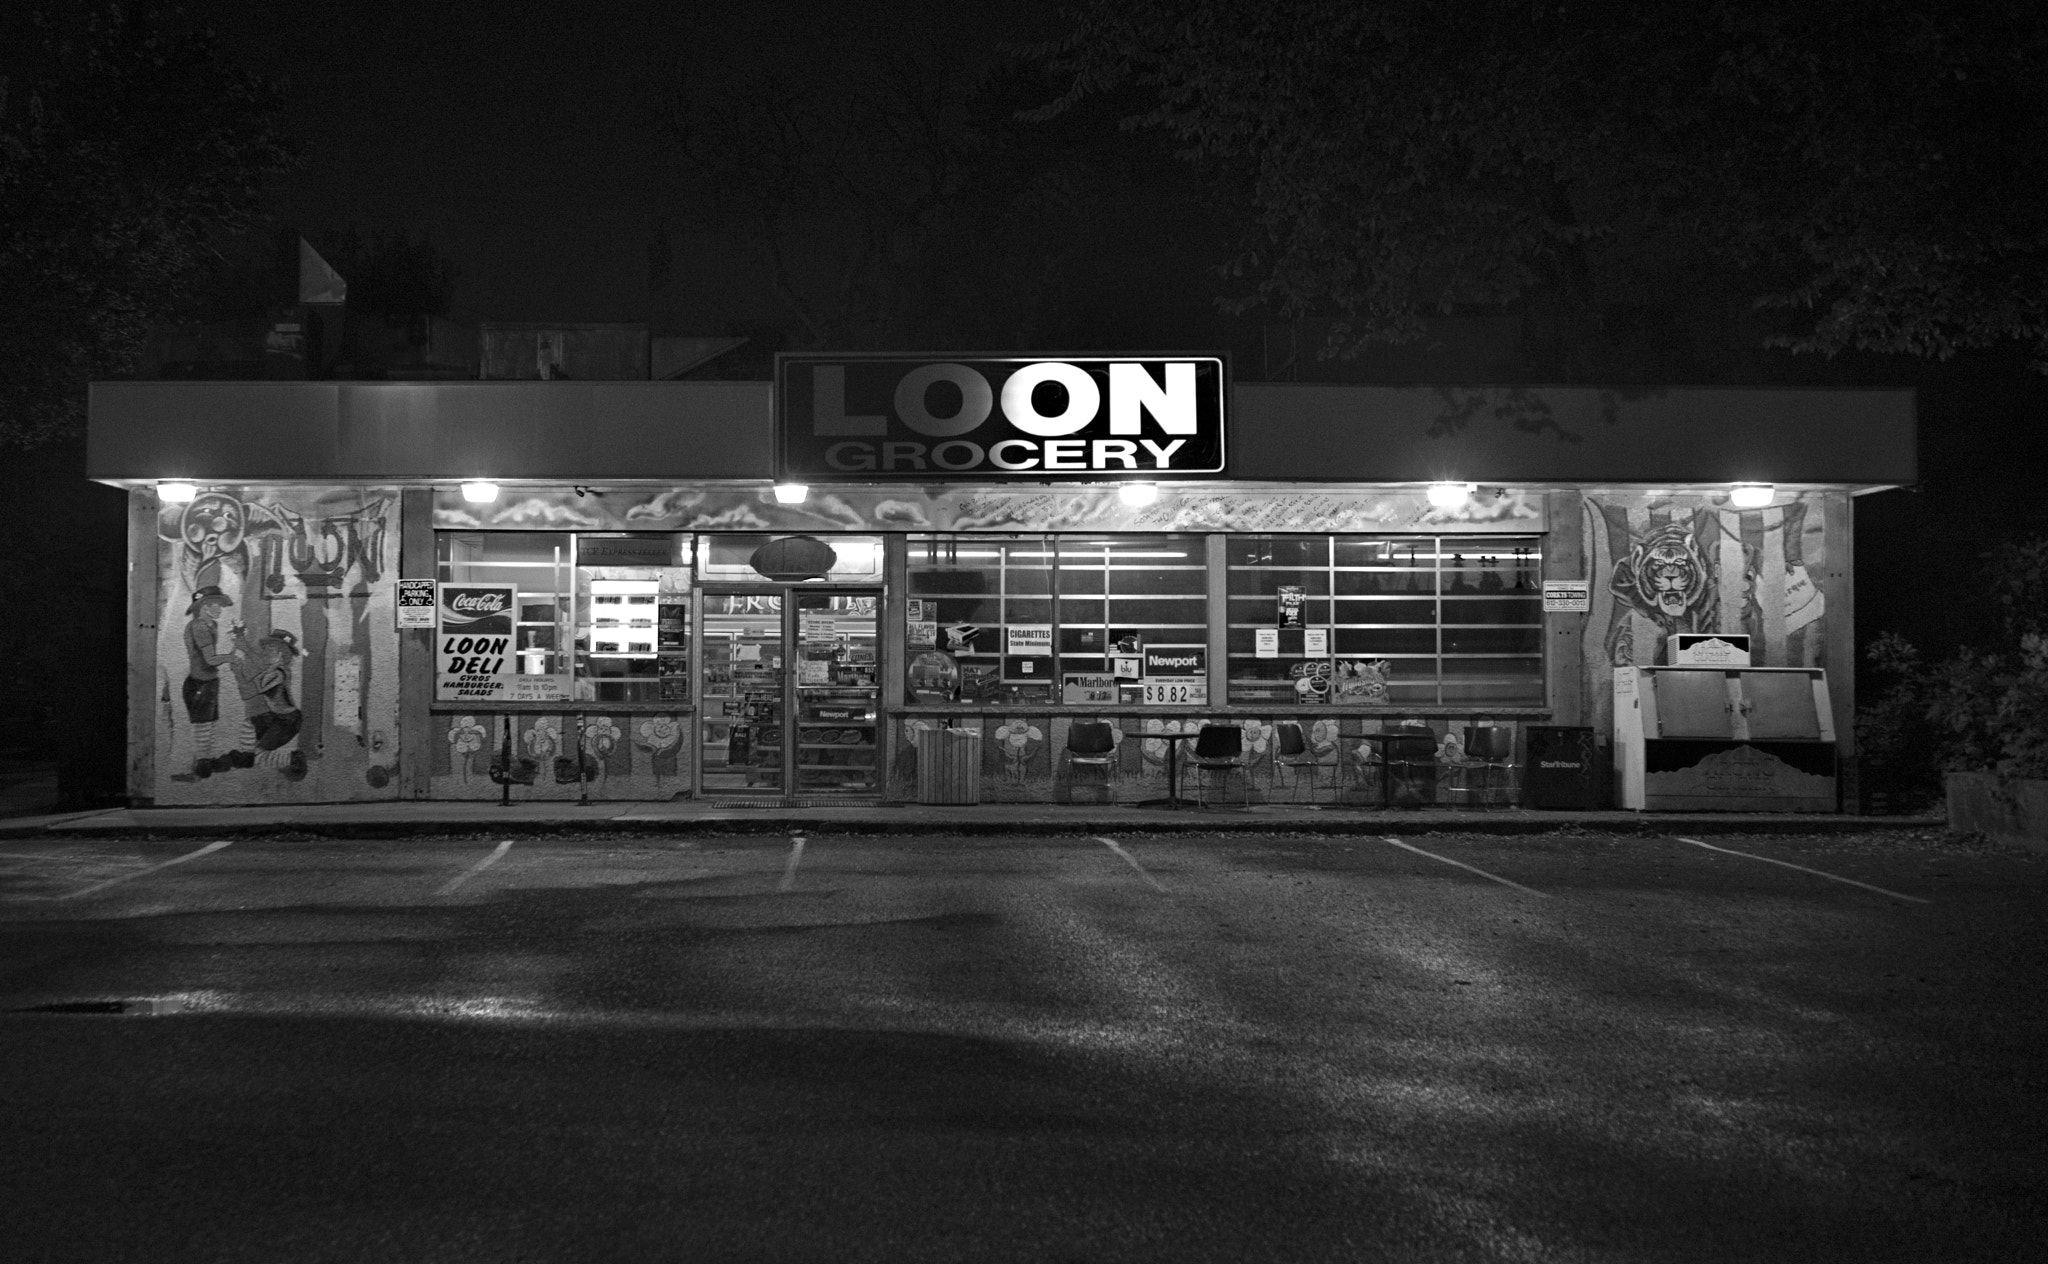 Nikon D800 + AF Zoom-Nikkor 35-70mm f/2.8 sample photo. The loon grocery (another view) photography